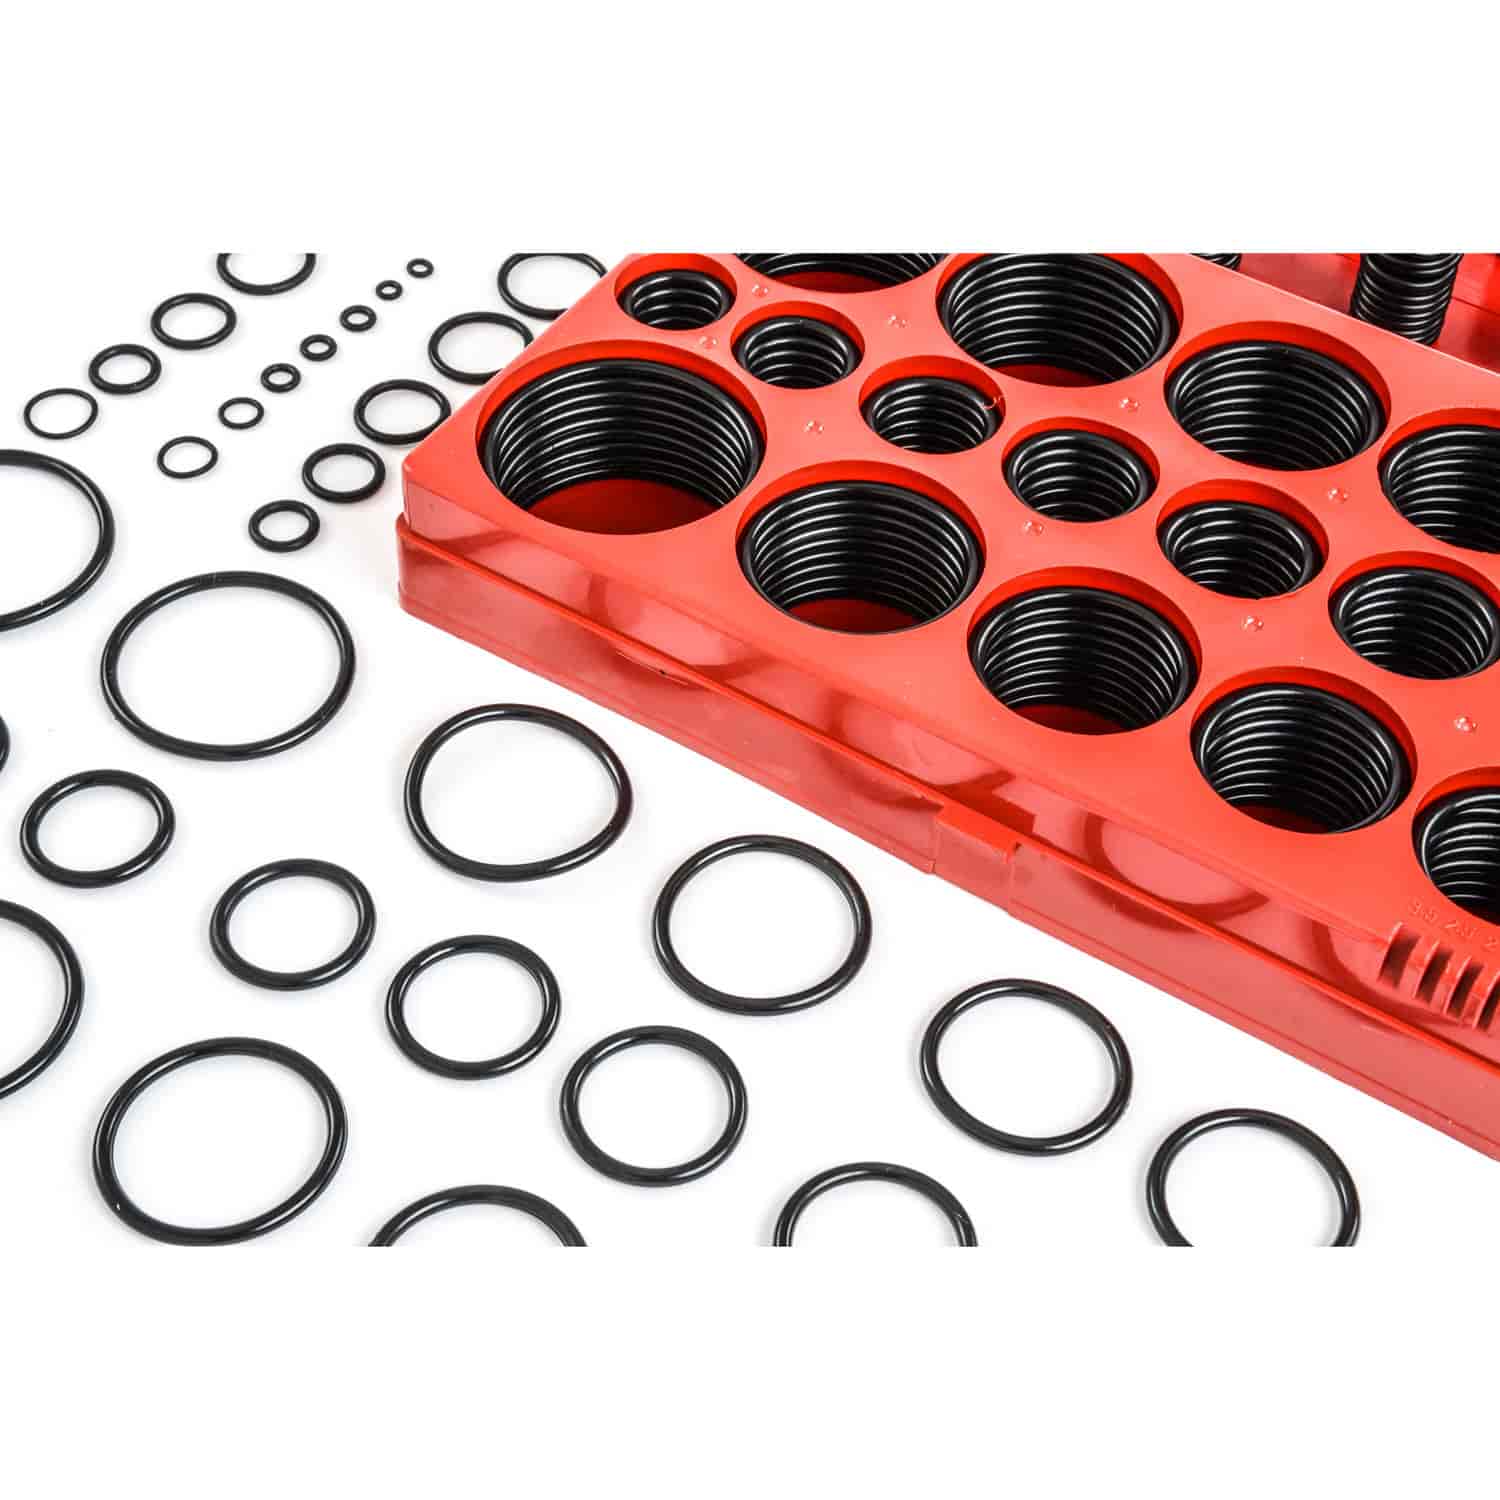 Rubber O-Ring Assortment (419 Pieces, Metric)